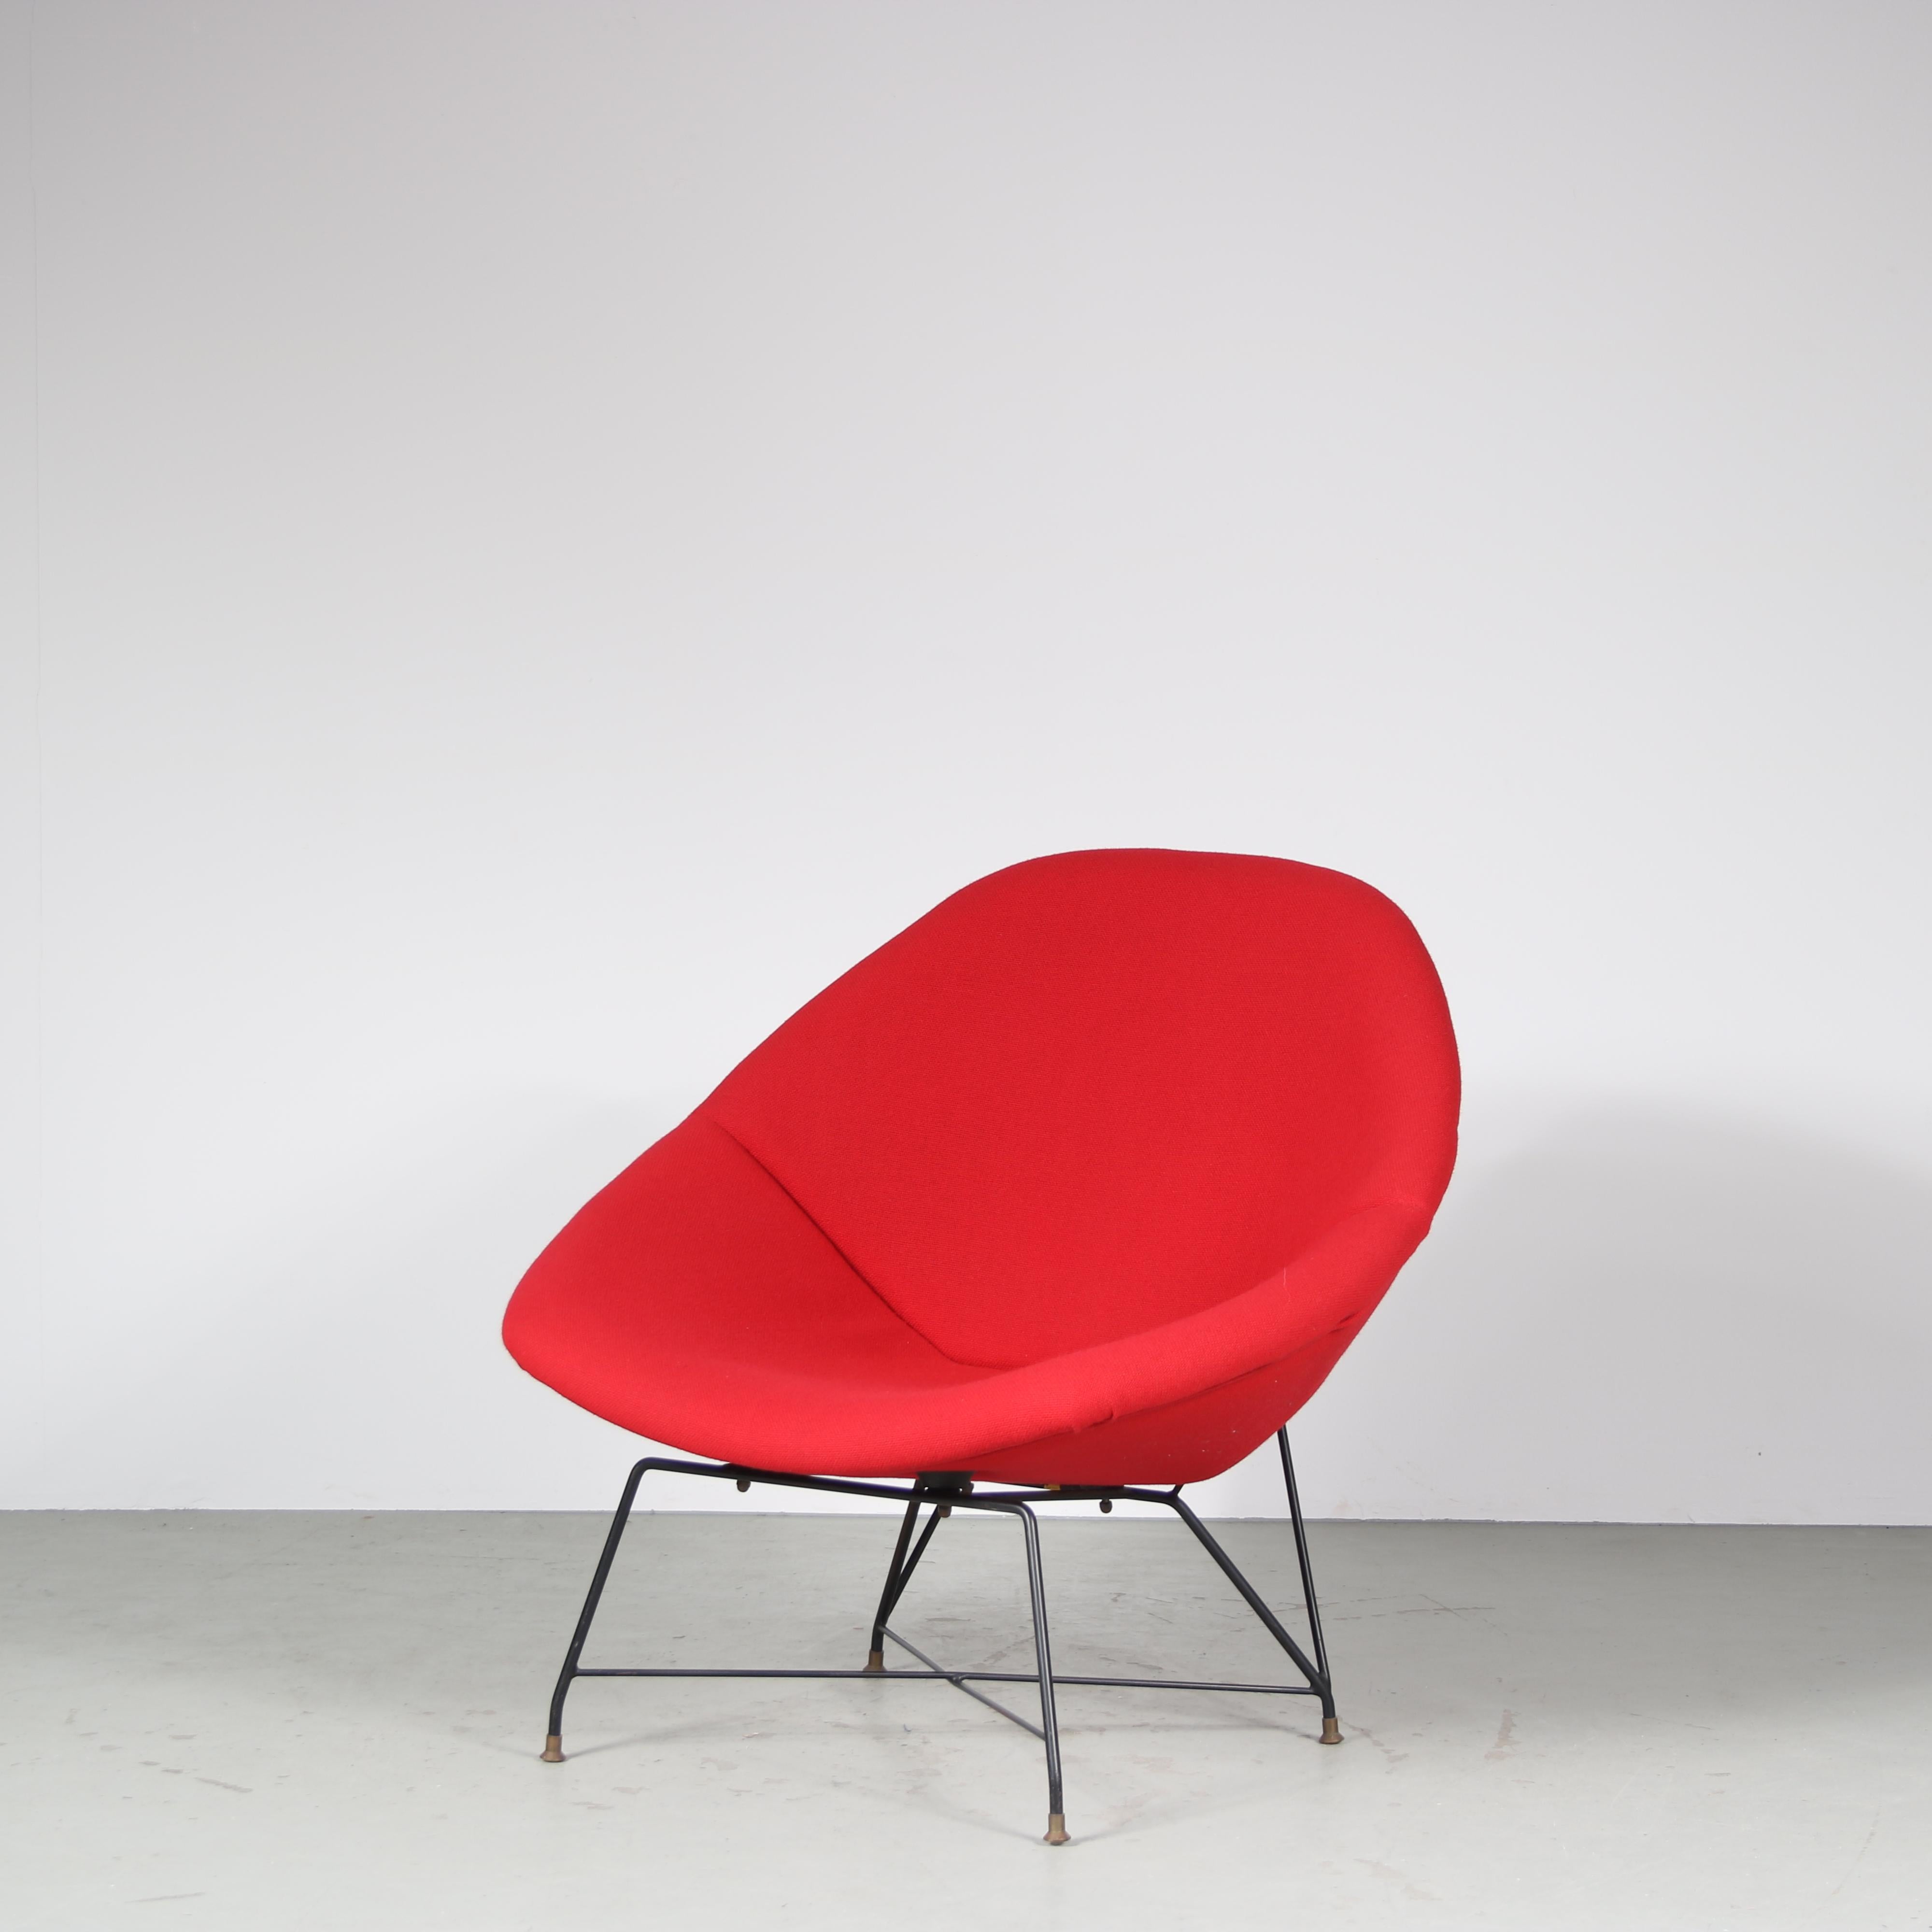 An impressive easy chair by Augusto Bozzi, manufactured by Saporiti in Italy in 1954.

This is a very rare and much sought after piece, the model is named “Kosmos”. The chair has a high quality black lacquered metal base and a beautiful red fabric